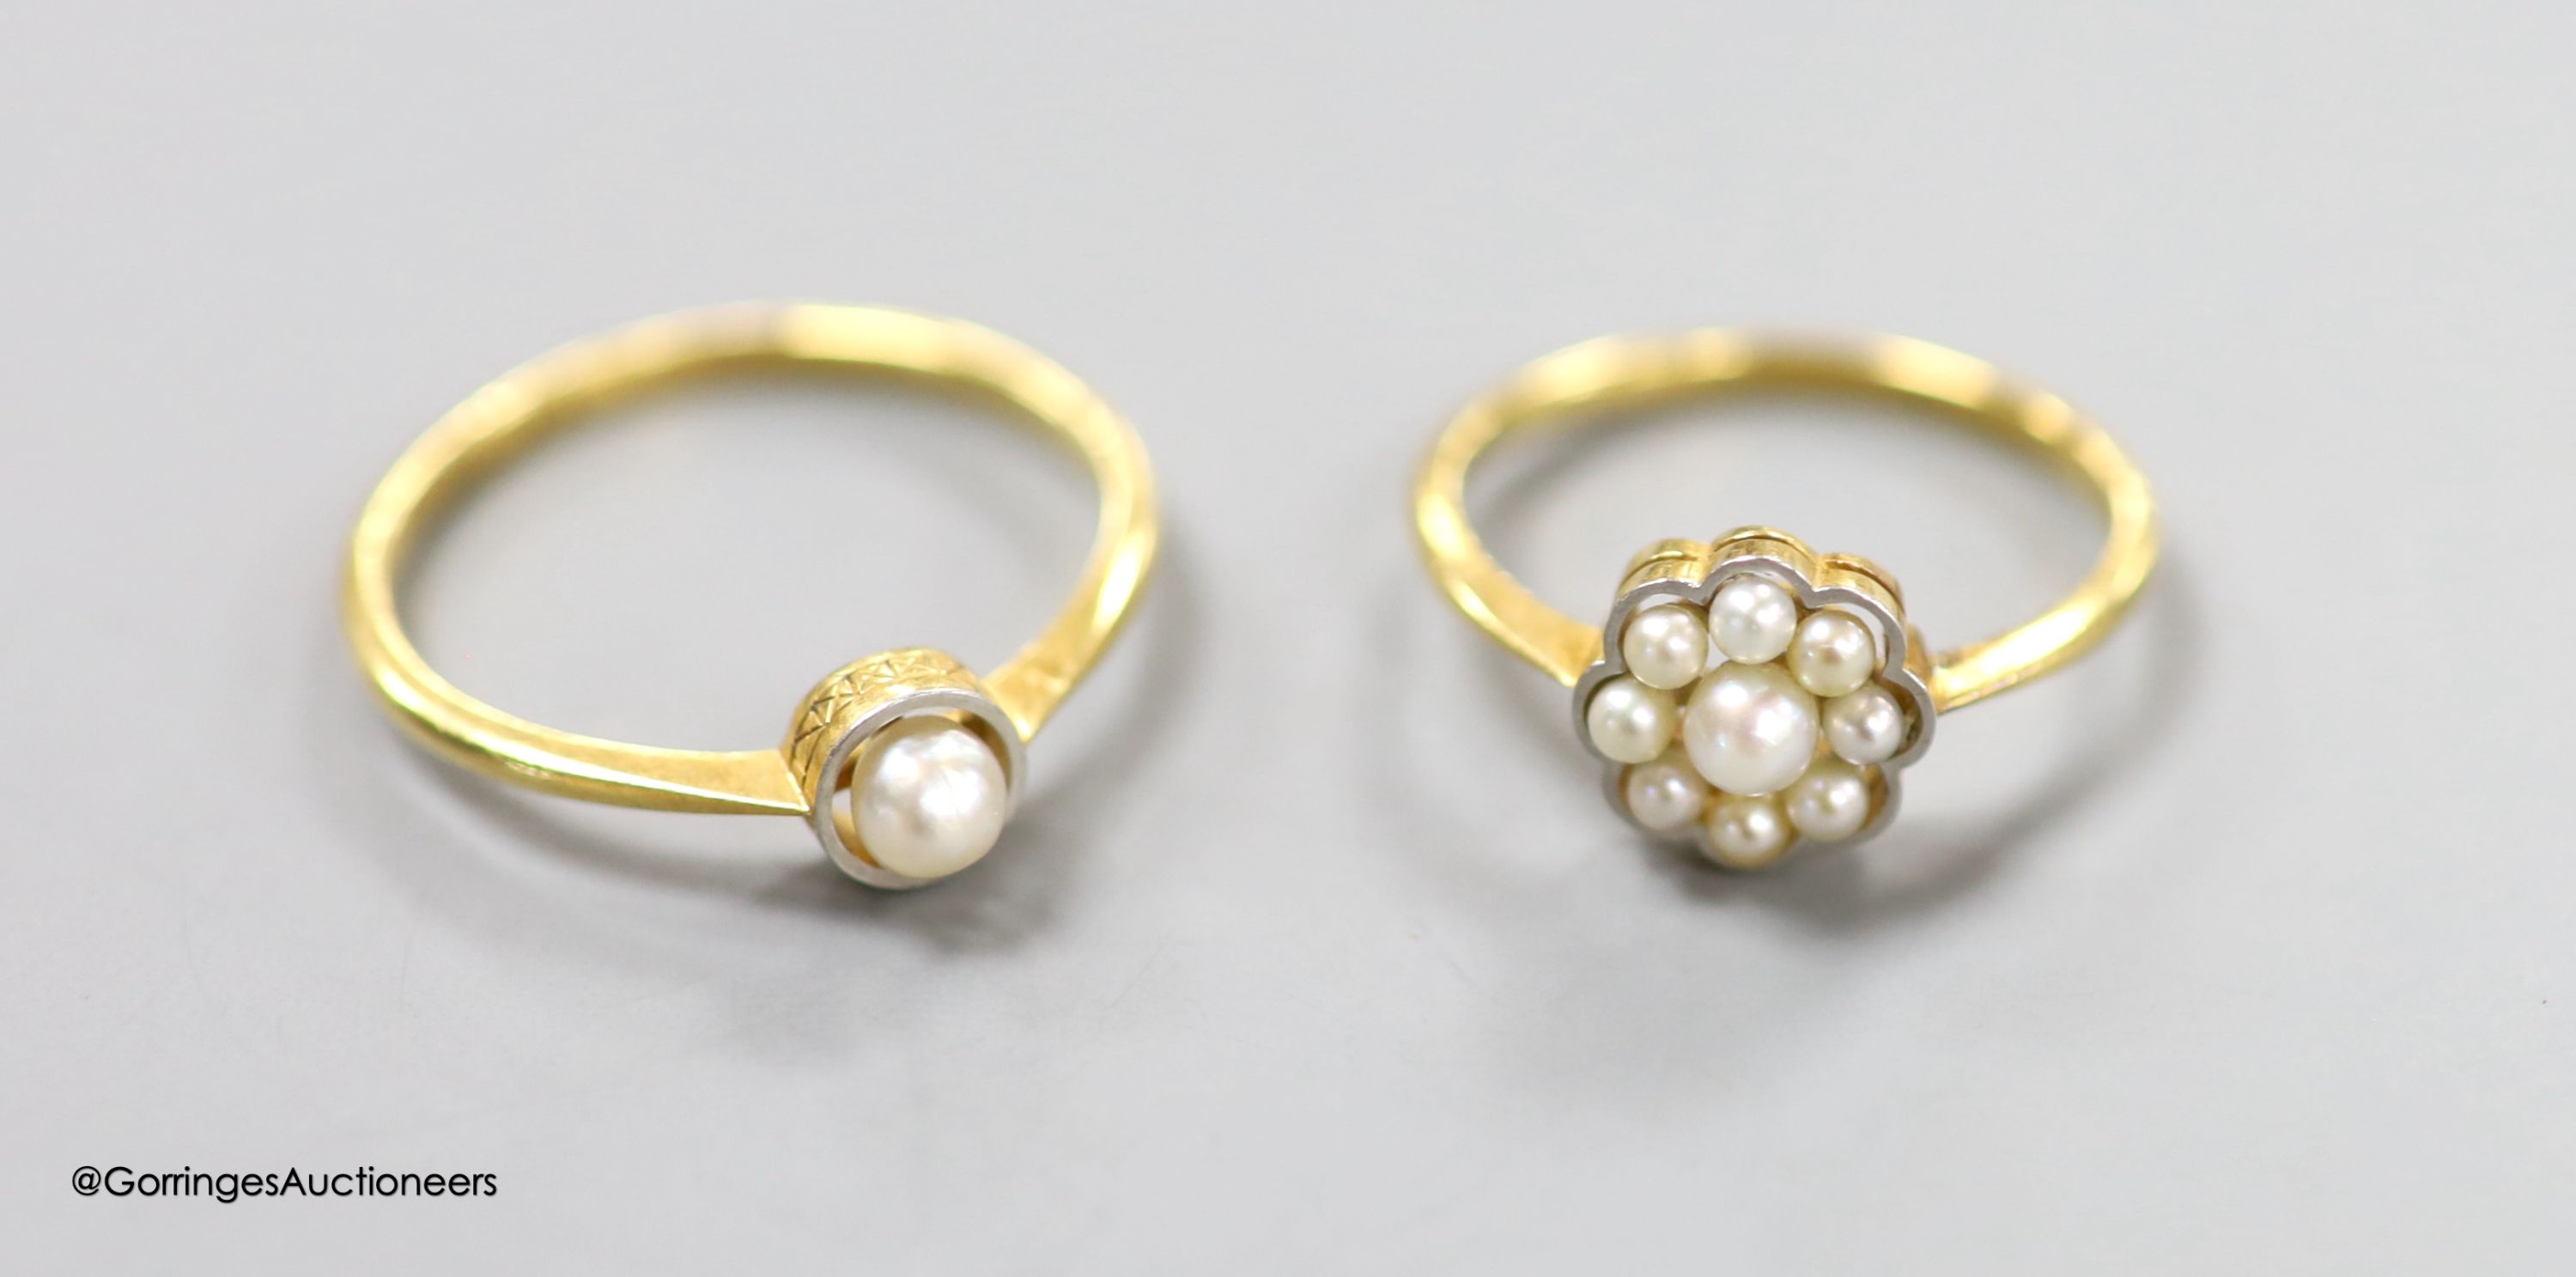 Two 18ct and cultured pearl set rings (single stone and cluster), sizes S & O, gross weight 5 grams.